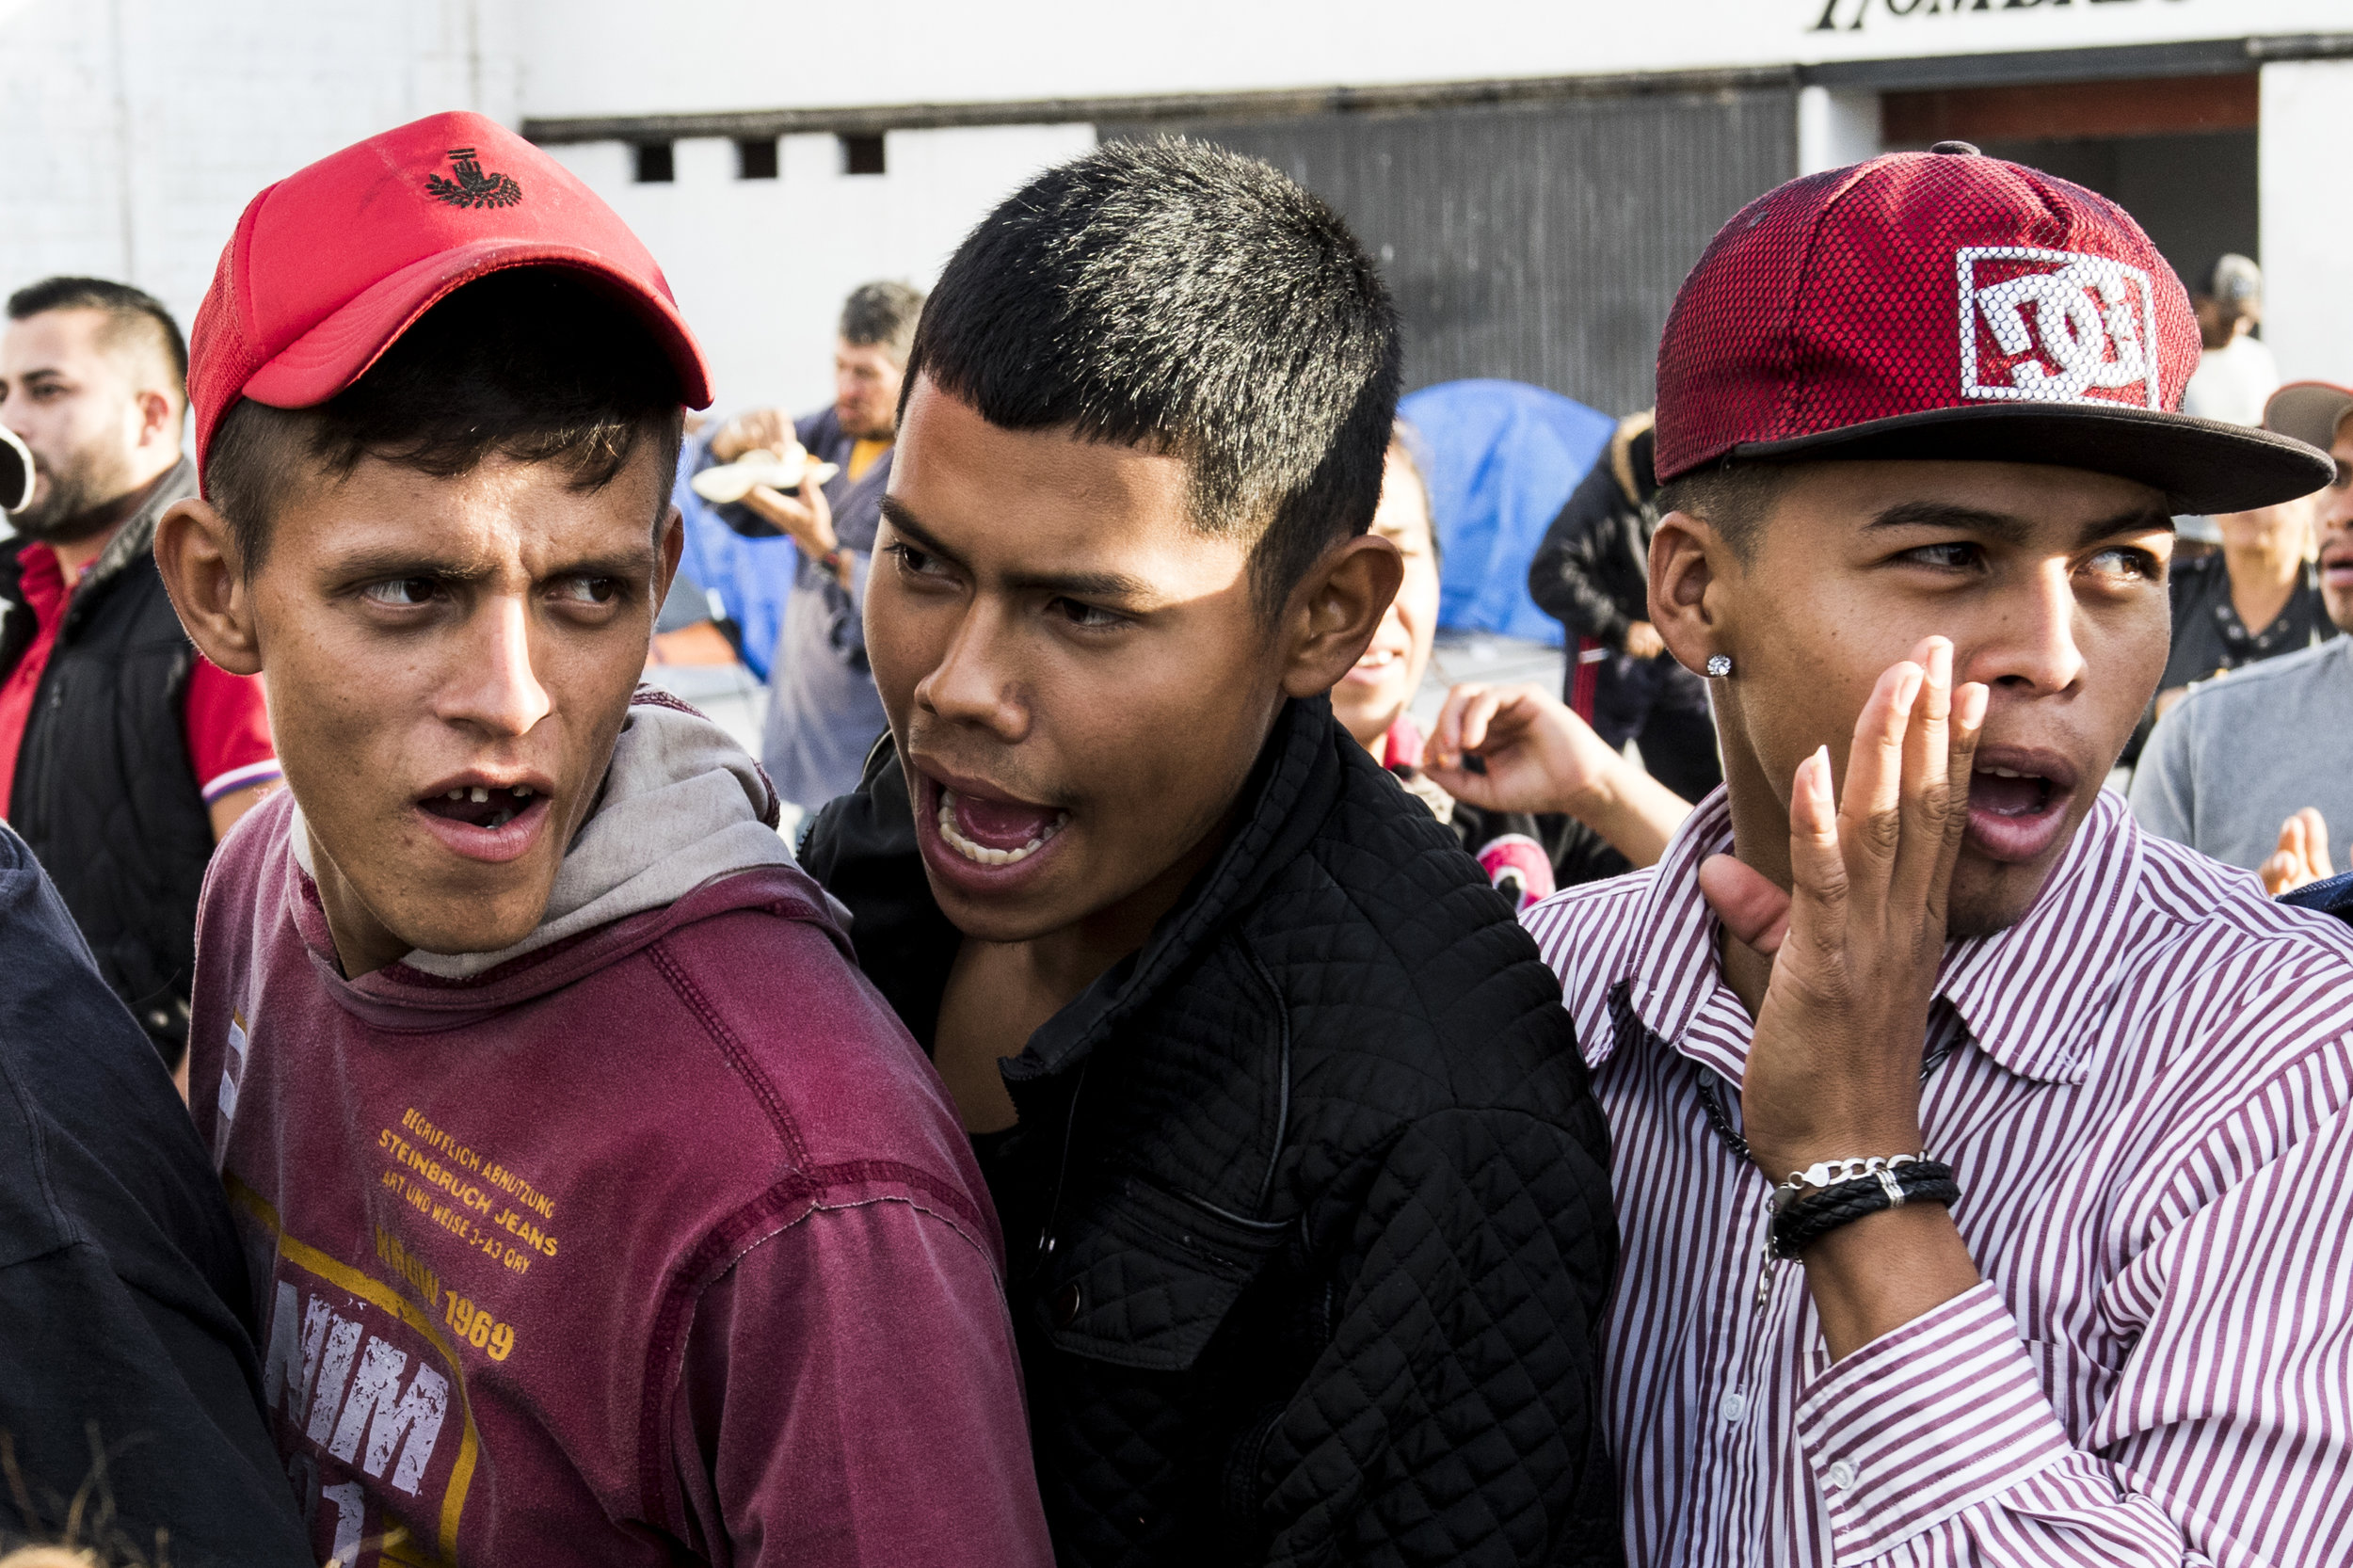   Three migrant teenage males shout to draw attention to people cutting a line for supplies at the El Barretal shelter, a former concert venue turned migrant shelter in Tijuana, Mexico, Saturday, Dec. 1, 2018. Photo By: Zane Meyer-Thornton/ Corsair C